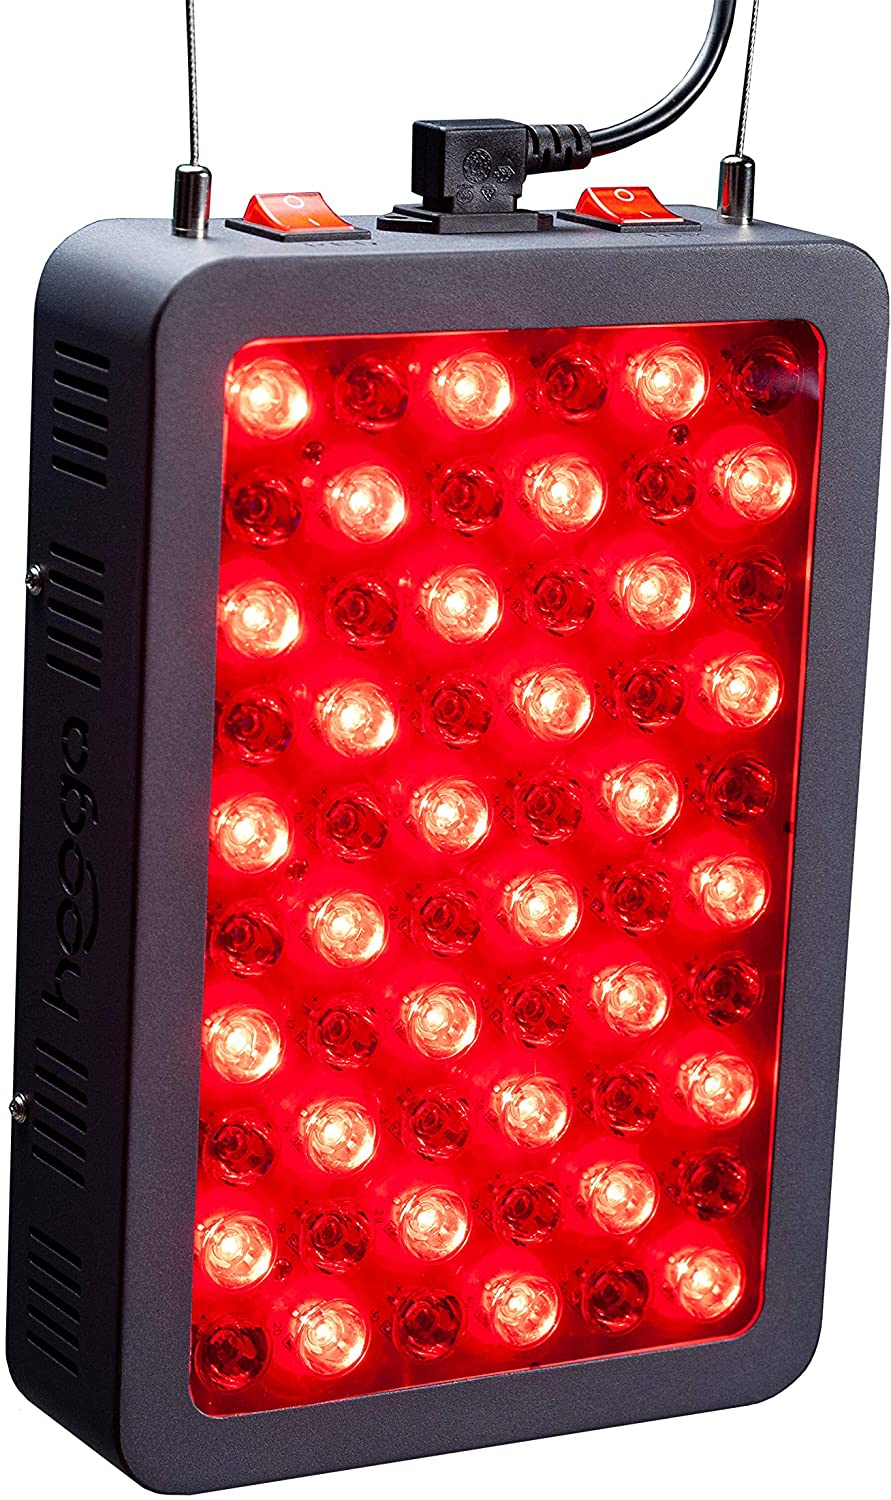 Red Light Therapy Device by Hooga